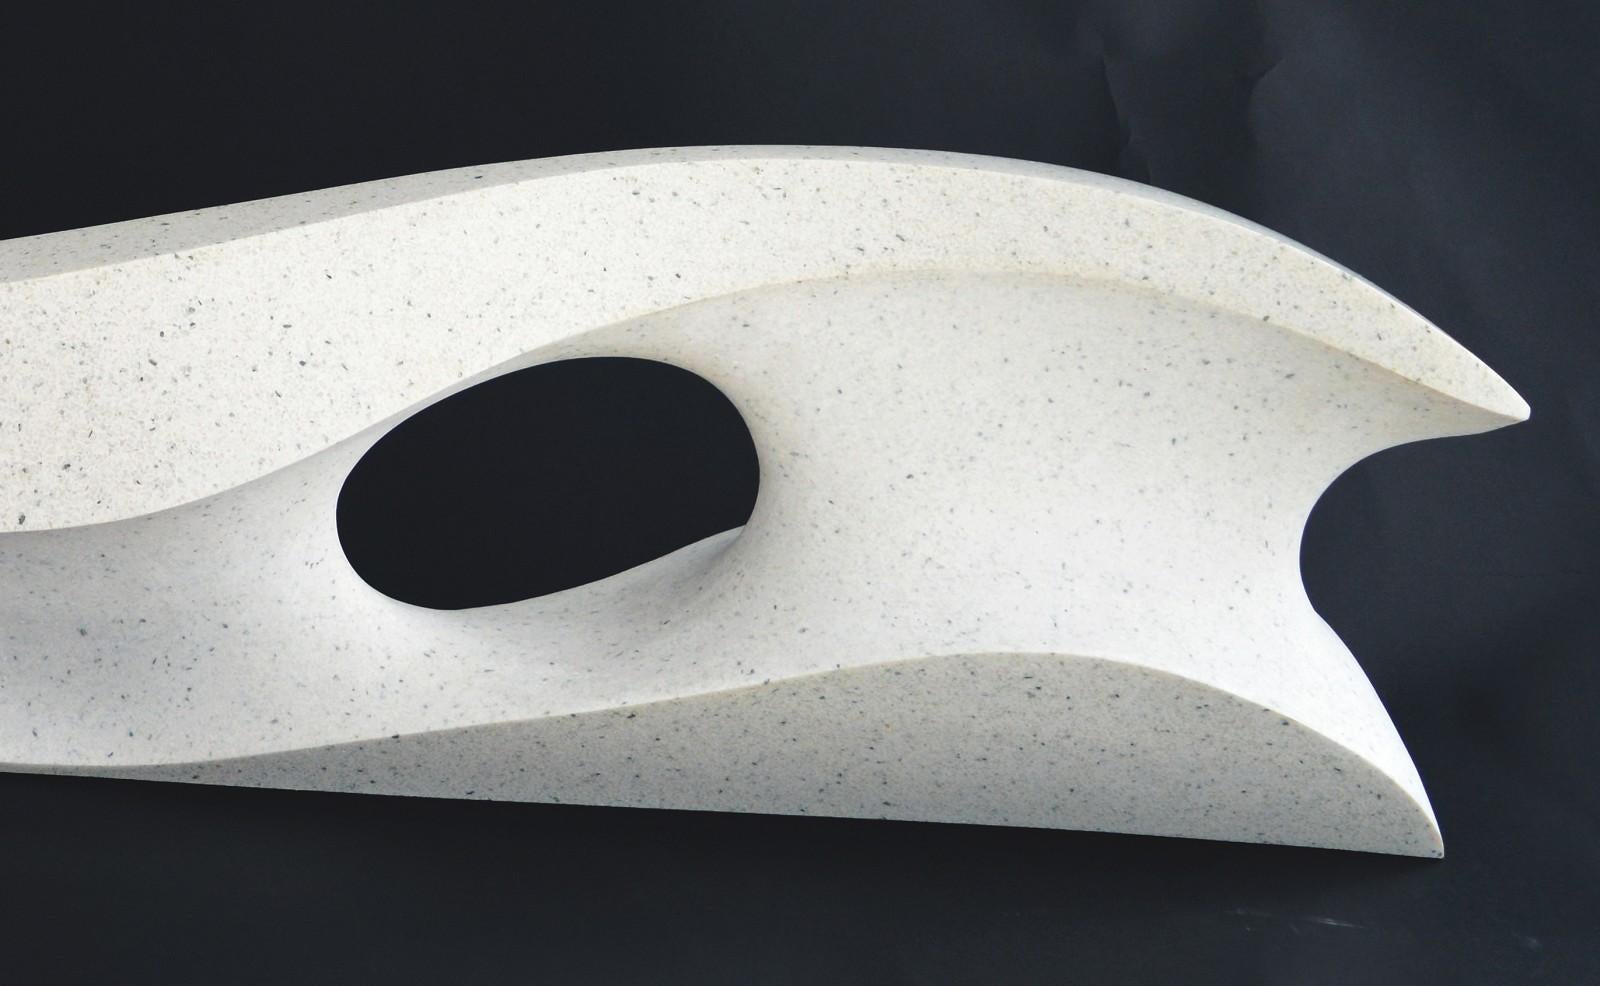 This piece is available on commission basis, please allow 8 - 12 weeks before shipping.

White abstracted marble sculpture. The implied motion of 'White Water' is reinforced when the sculpture is viewed in the round.  Jeremy Guy works with an